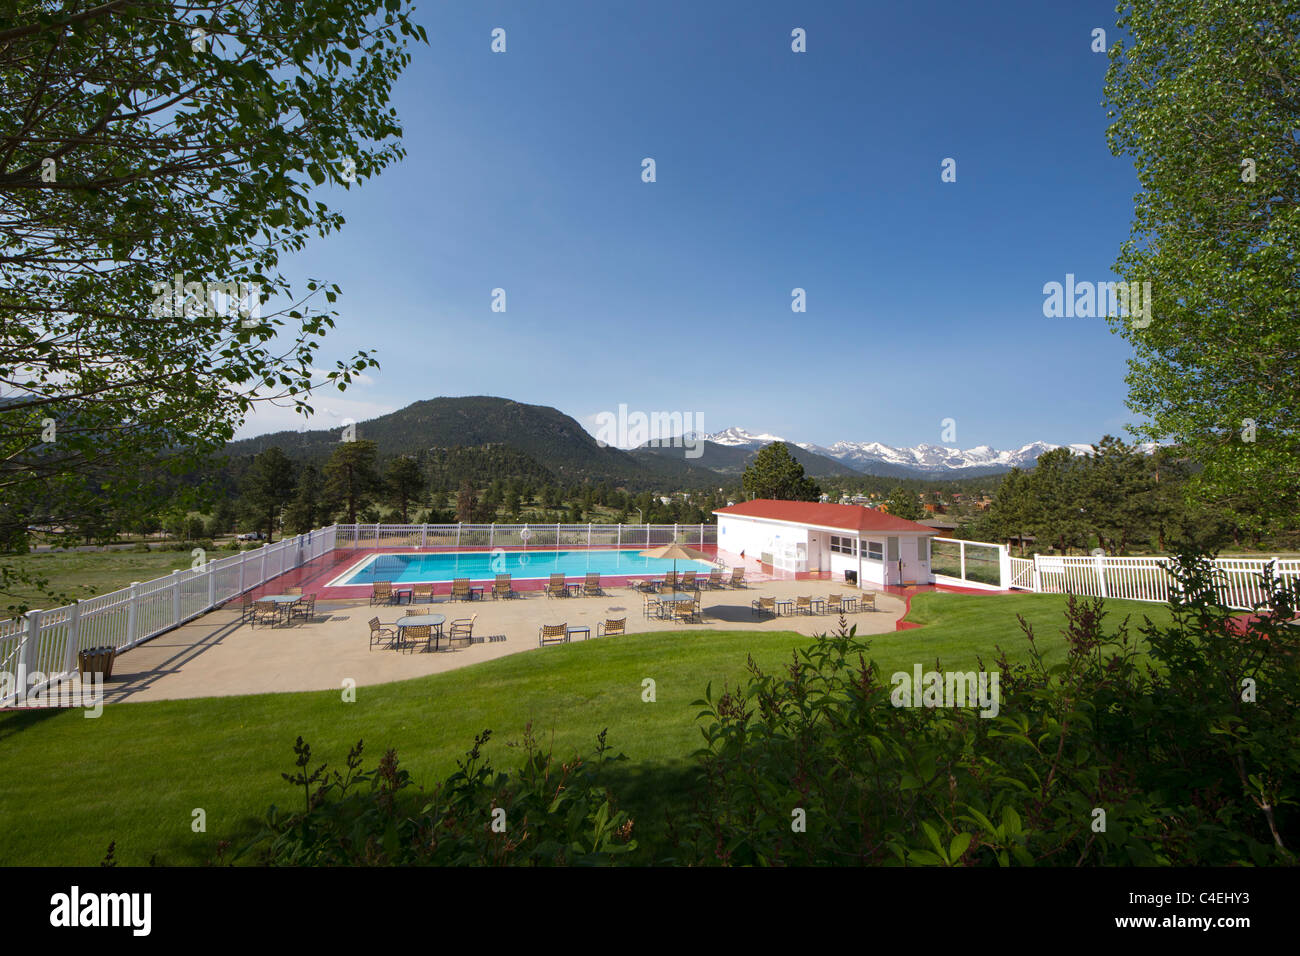 The swimming pool at the Stanley Hotel in Estes Park, Colorado provides for spectacular views of the Rocky Mountains Stock Photo